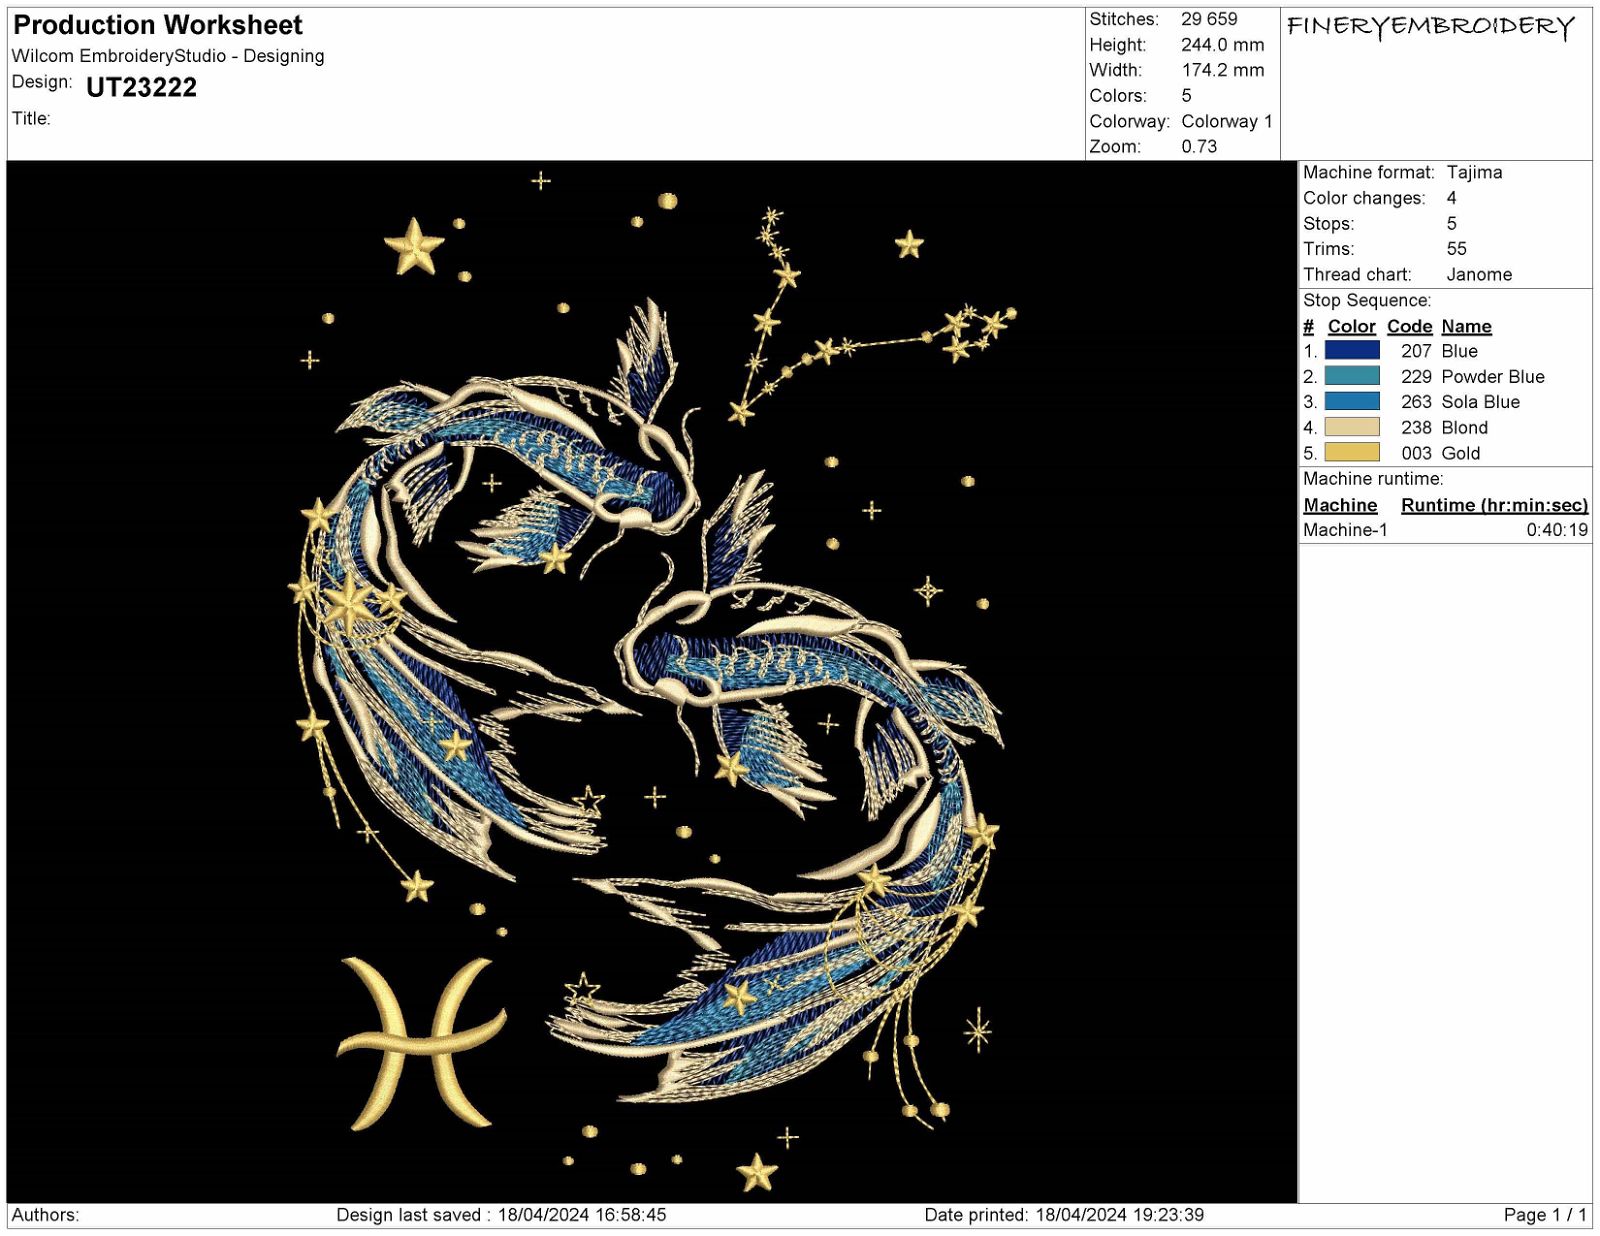 Zodiac-Inspired Embroidery Designs: Exclusive Pack of 12 - FineryEmbroidery